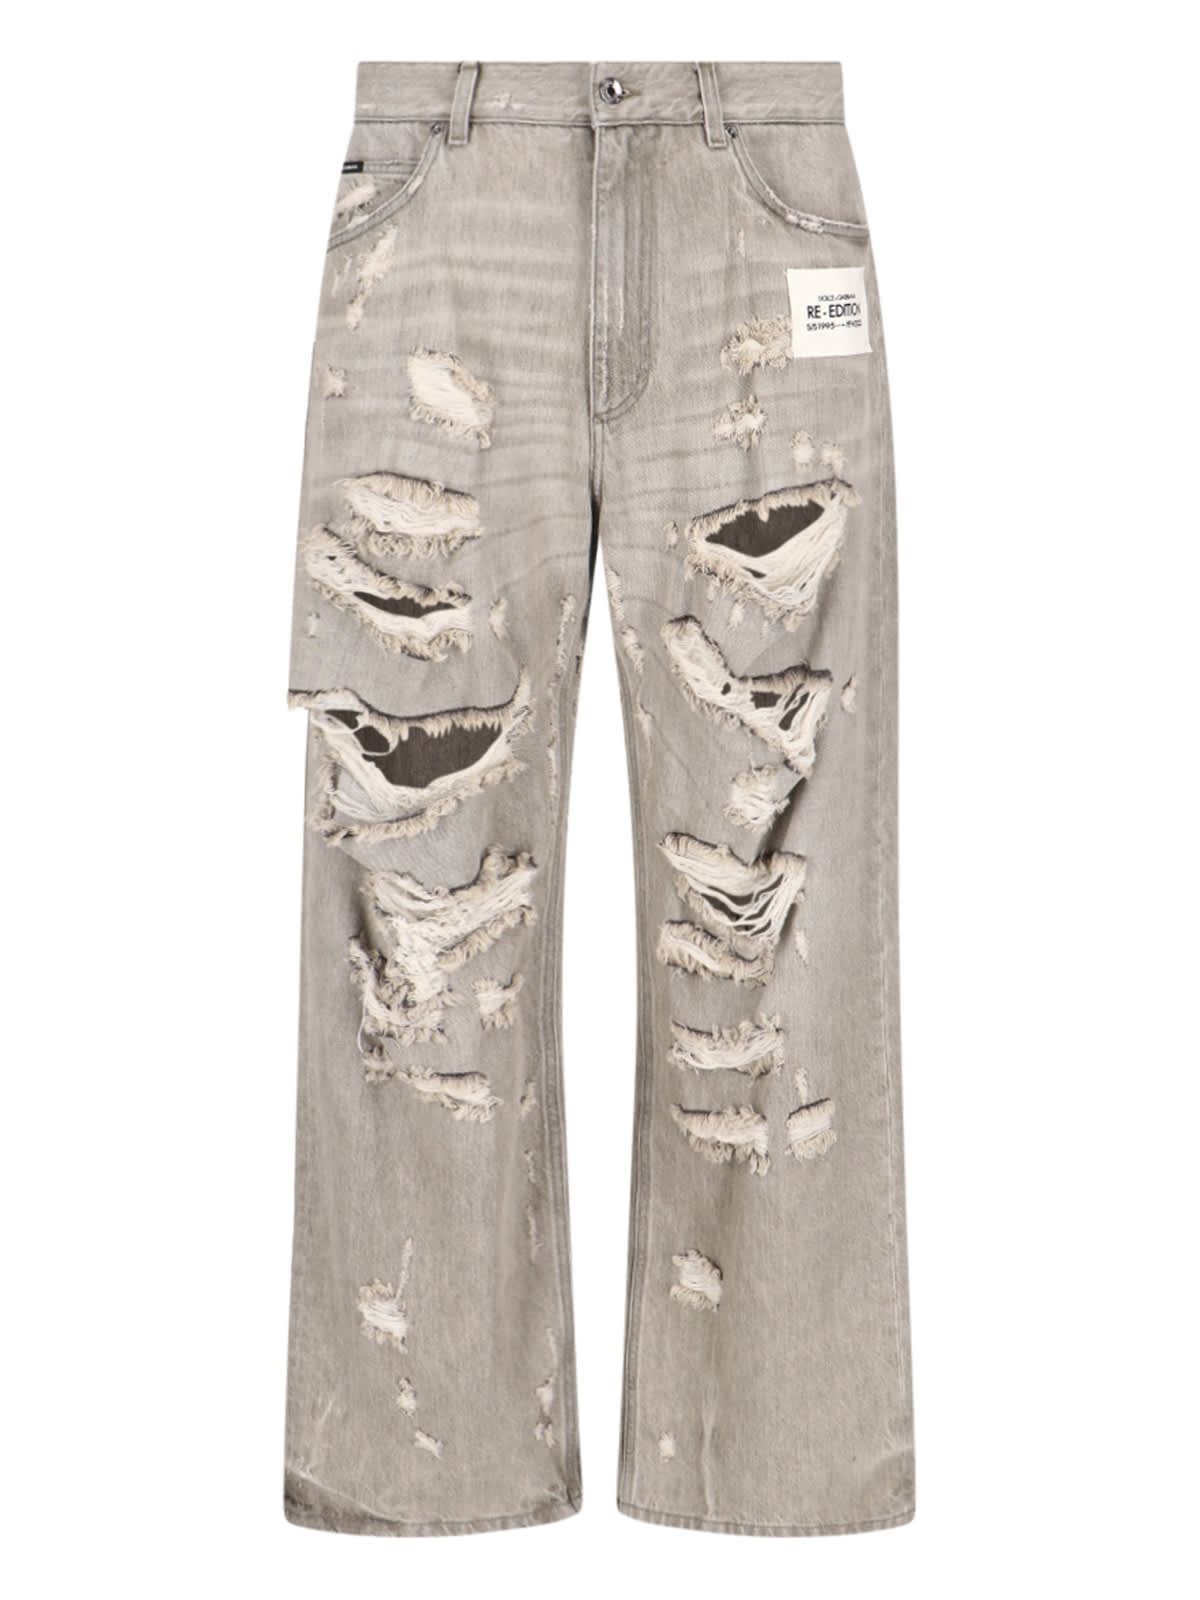 DOLCE & GABBANA S/S 1995 RE-EDITION JEANS